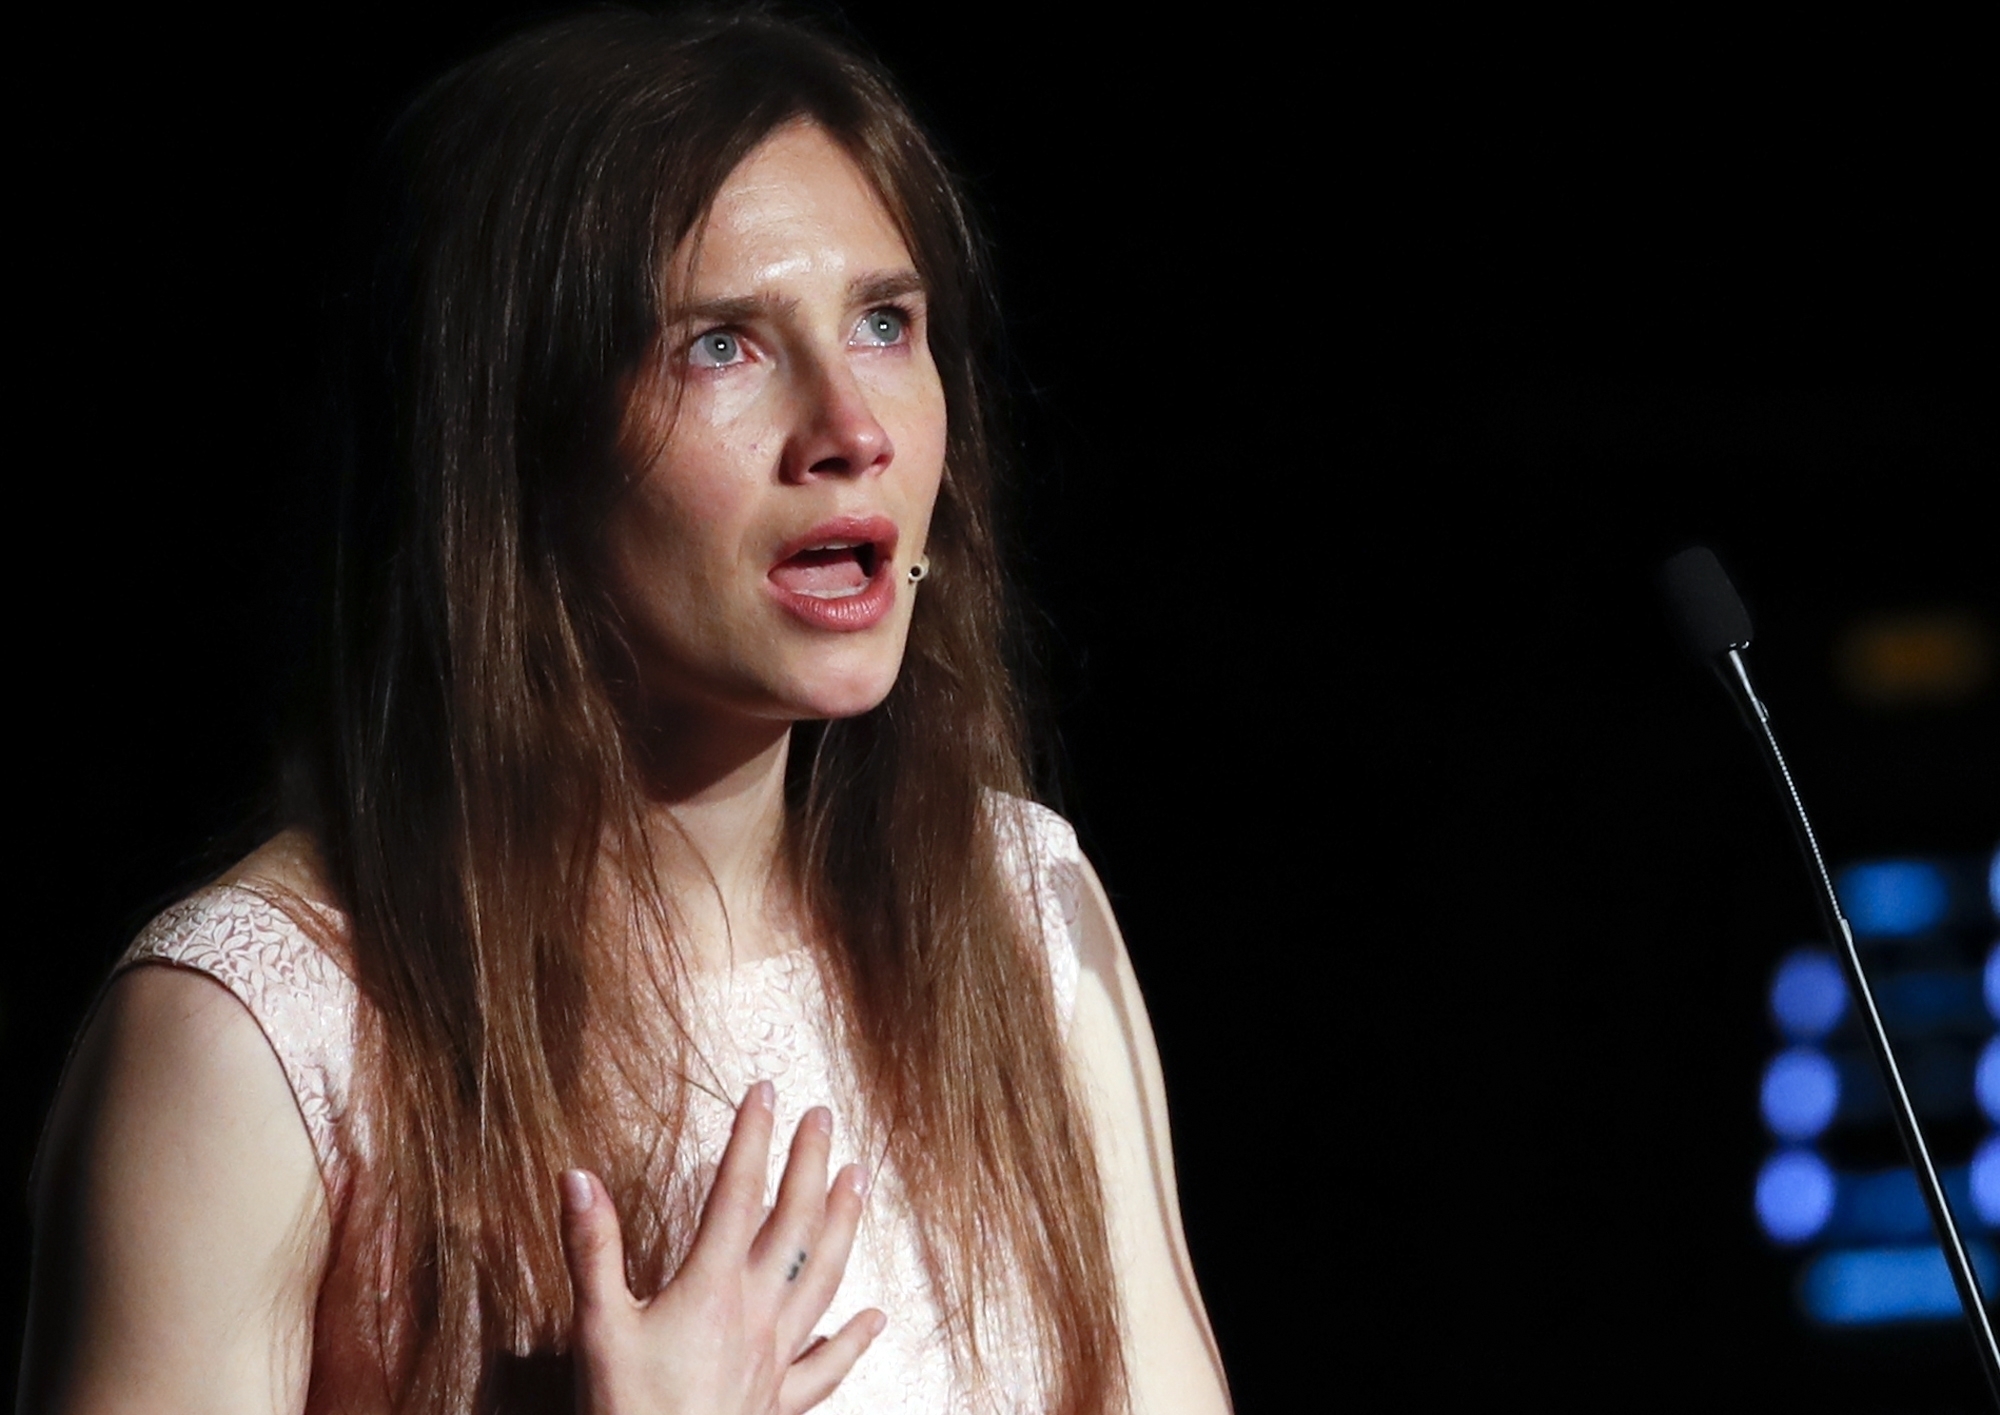 FILE - In this June 15, 2019 file photo, Amanda Knox gets emotional as she speaks at a Criminal Justice Festival at the University of Modena, Italy. Knox is speaking out about her name being associated with the new film “Stillwater,” Friday, July 30, 2021, saying any connection rips off “my story without my consent at the expense of my reputation.” “Stillwater” stars Matt Damon as a father who flies to France to help his estranged daughter, who has been convicted of murdering her girlfriend. (AP Photo/Antonio Calanni, File)